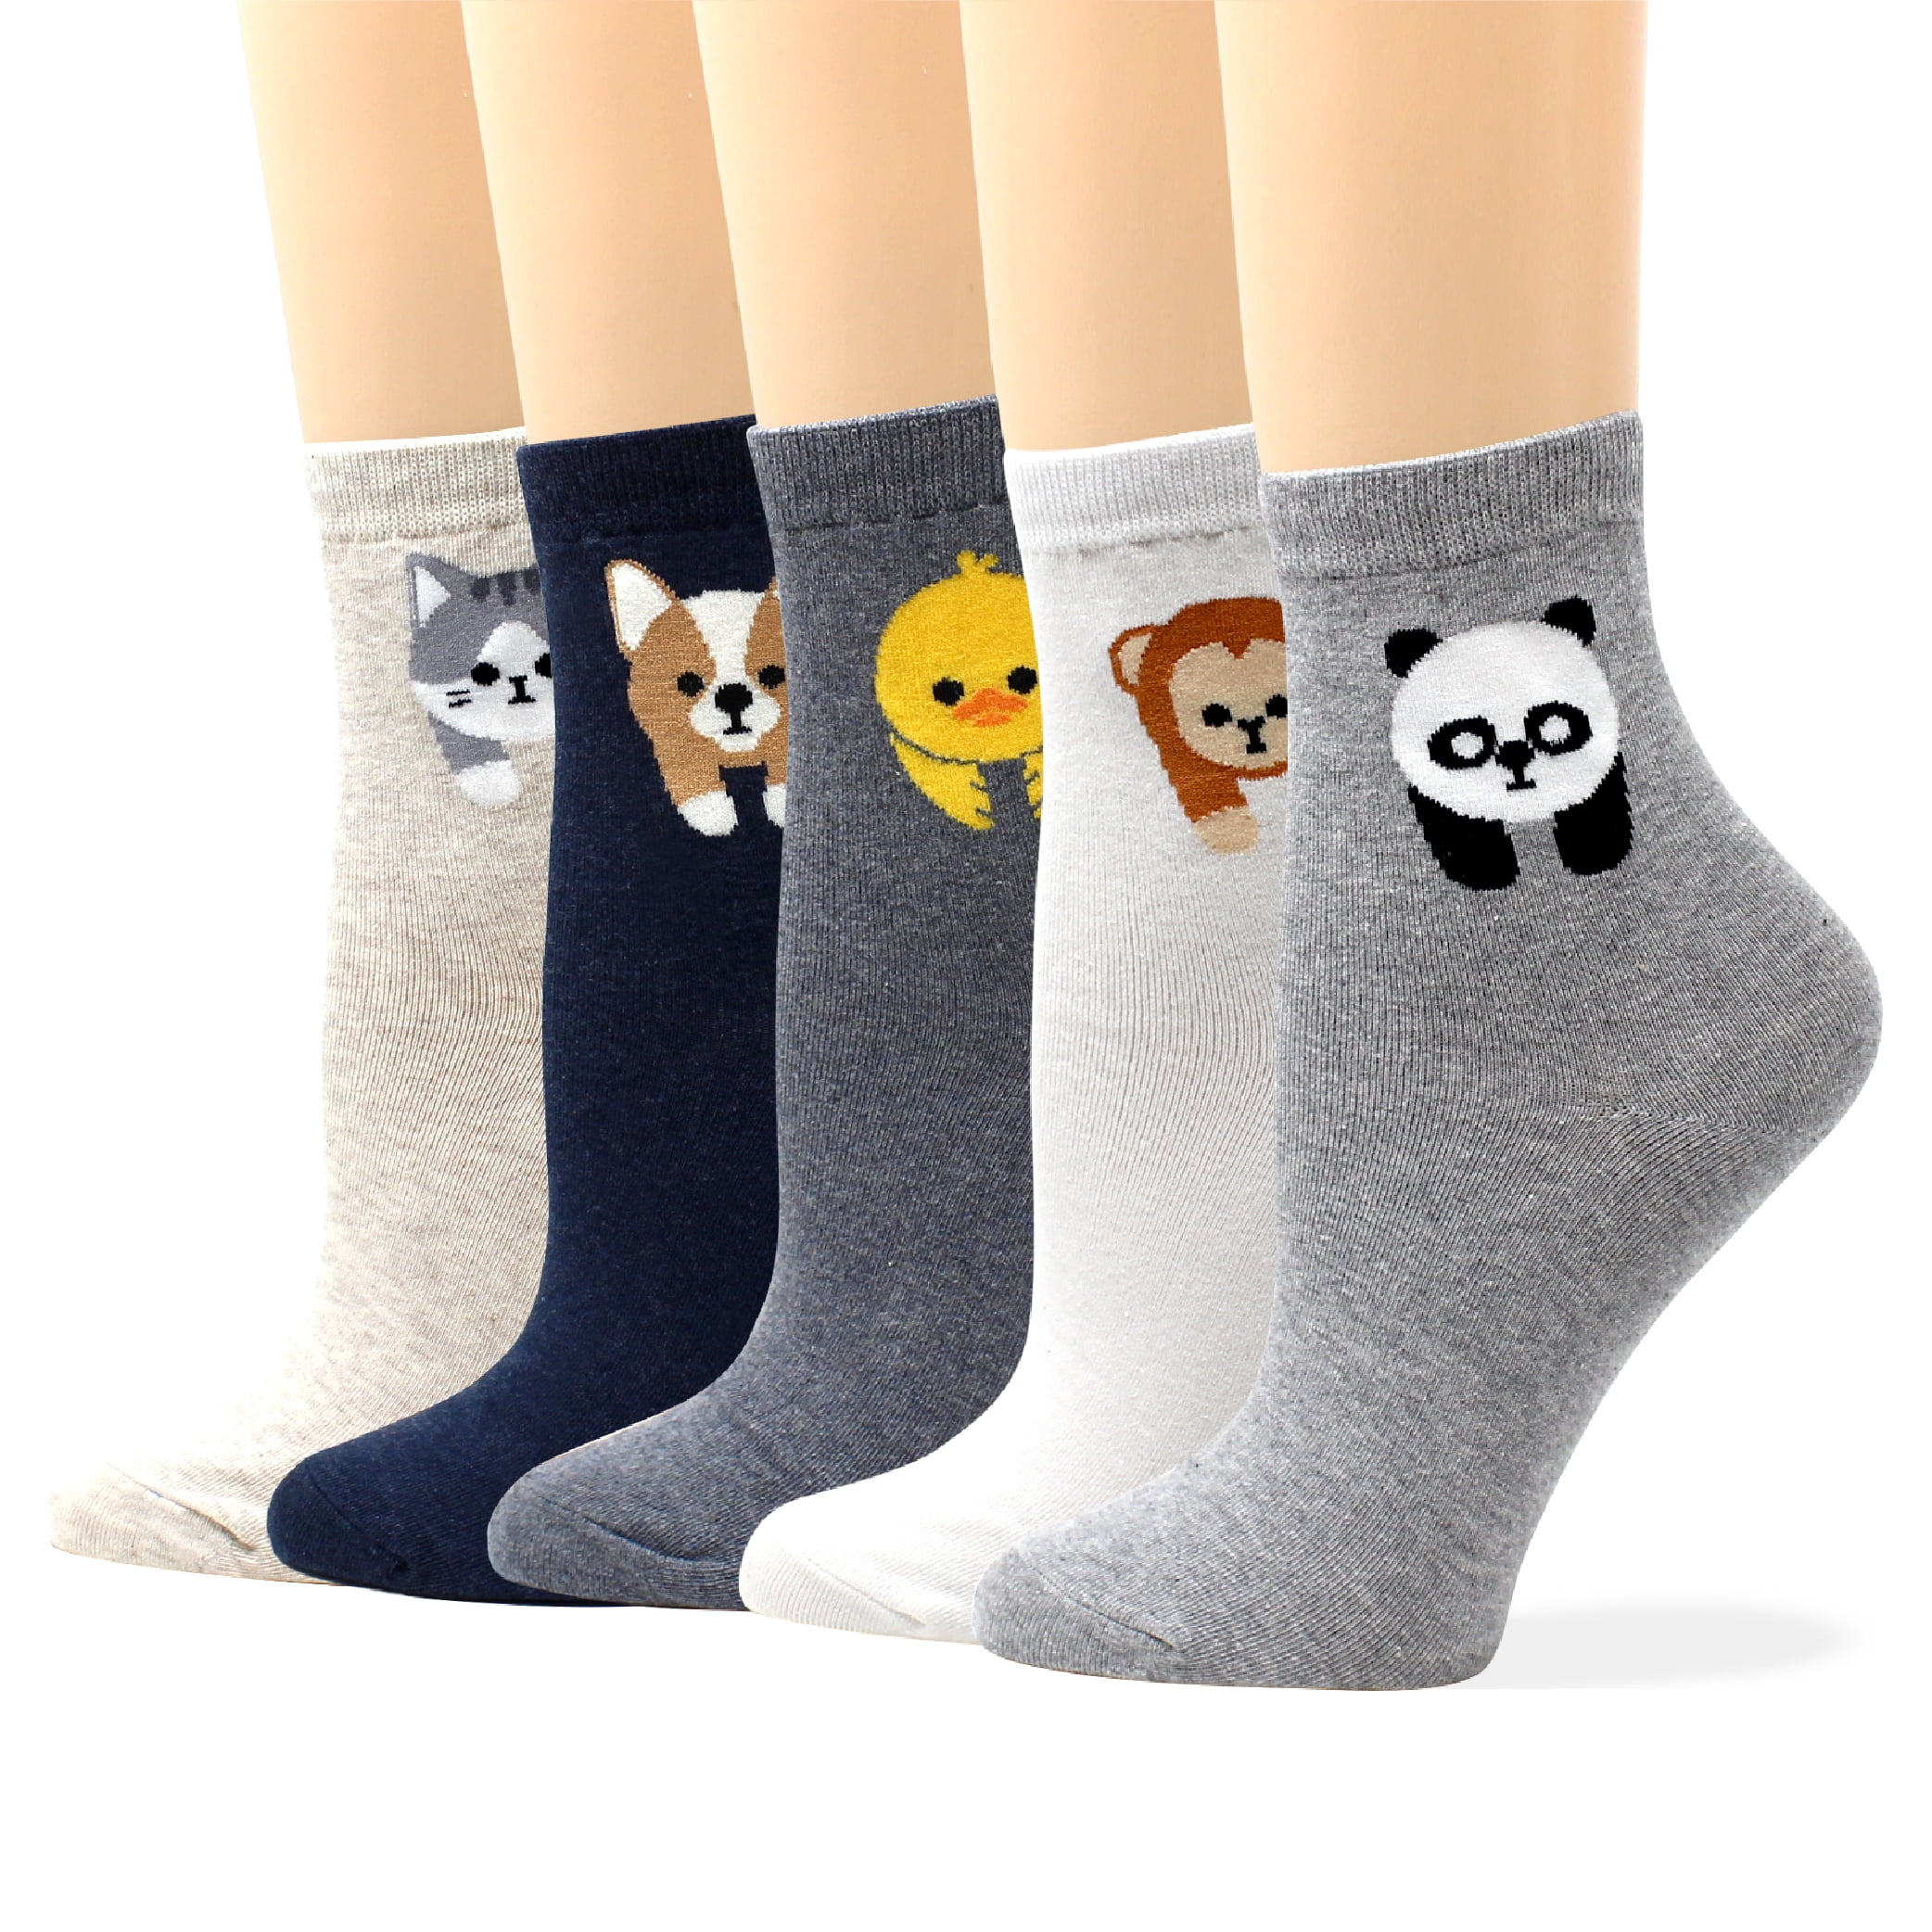 Unisex Cute Panda Gifts White And Black Athletic Quarter Ankle Print Breathable Hiking Running Socks 